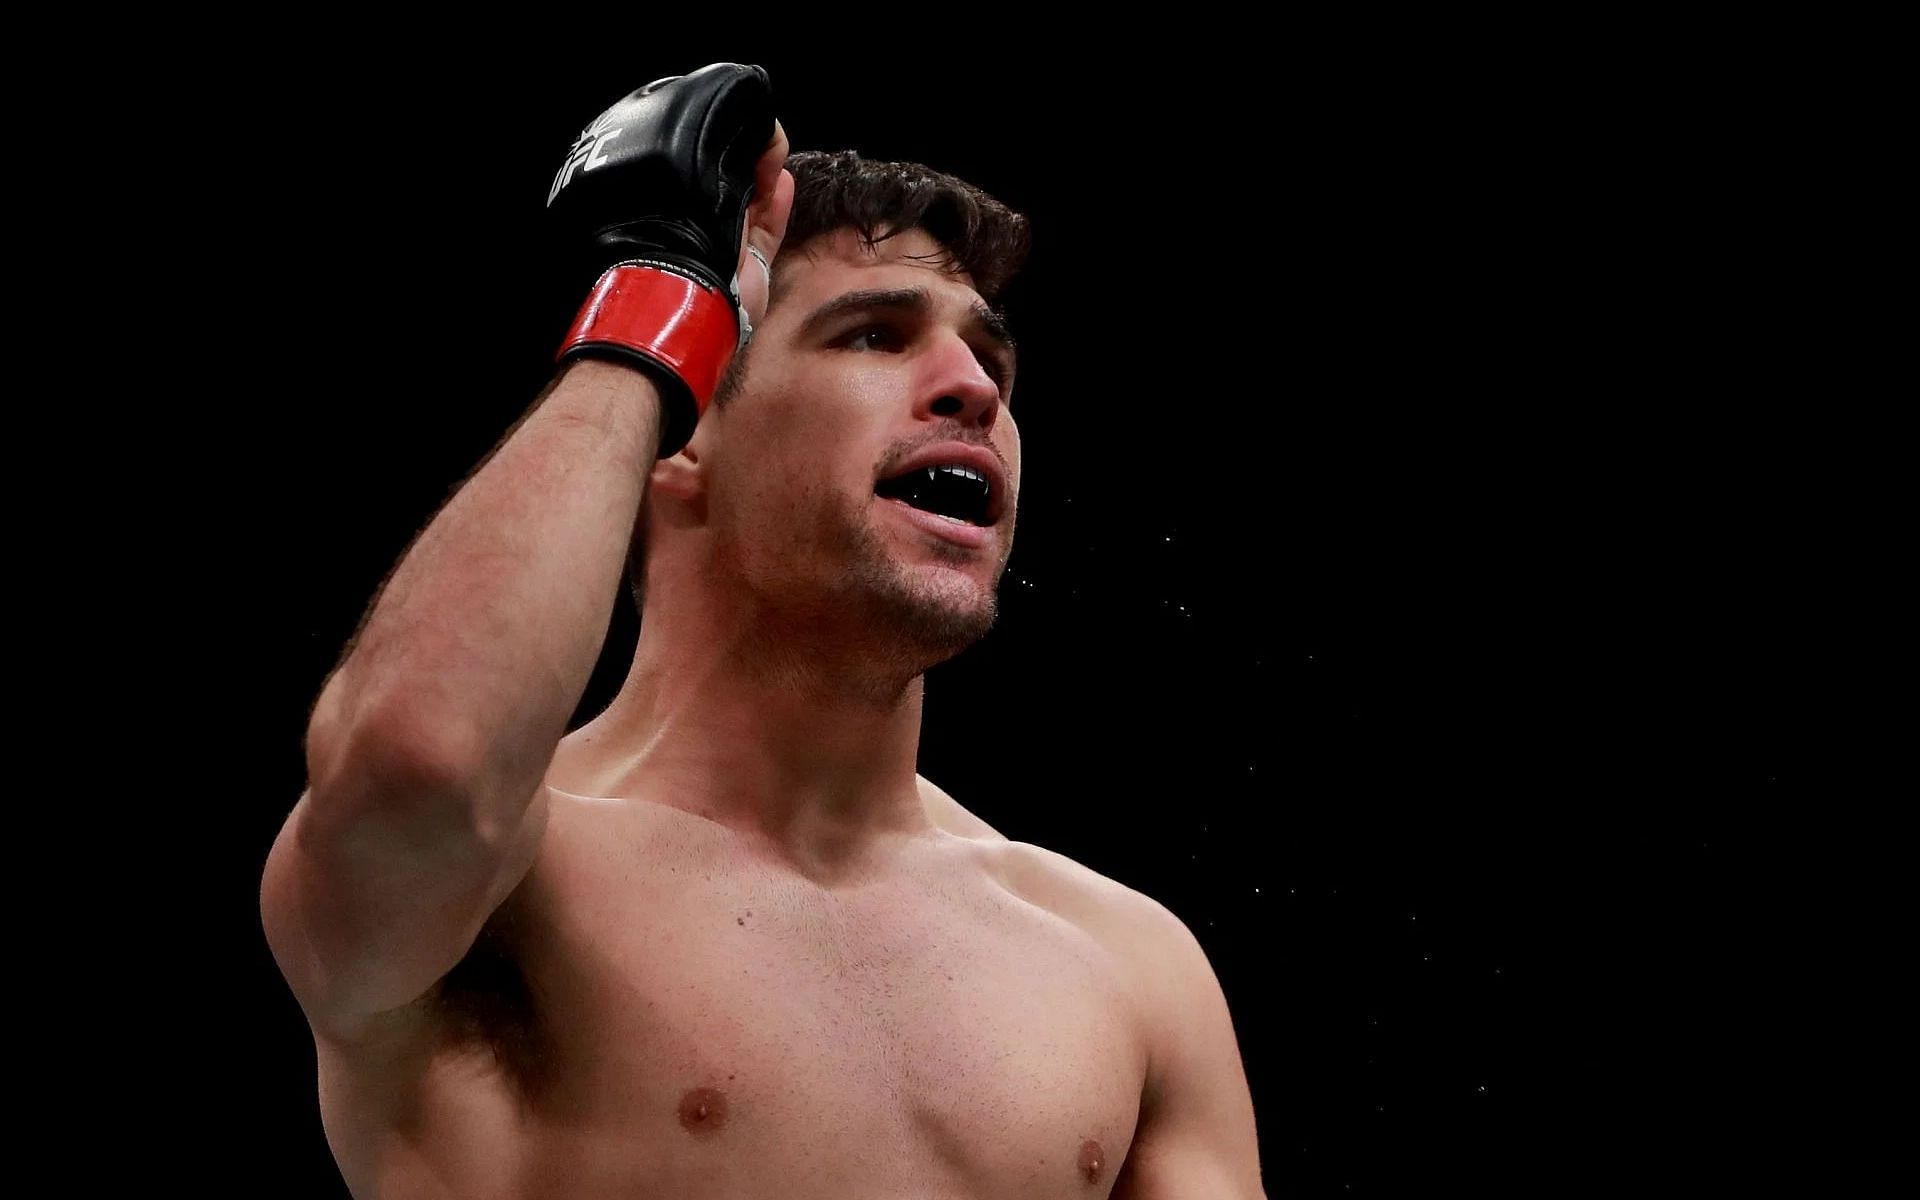 Vicente Luque picked up a major win last night against Rafael Dos Anjos